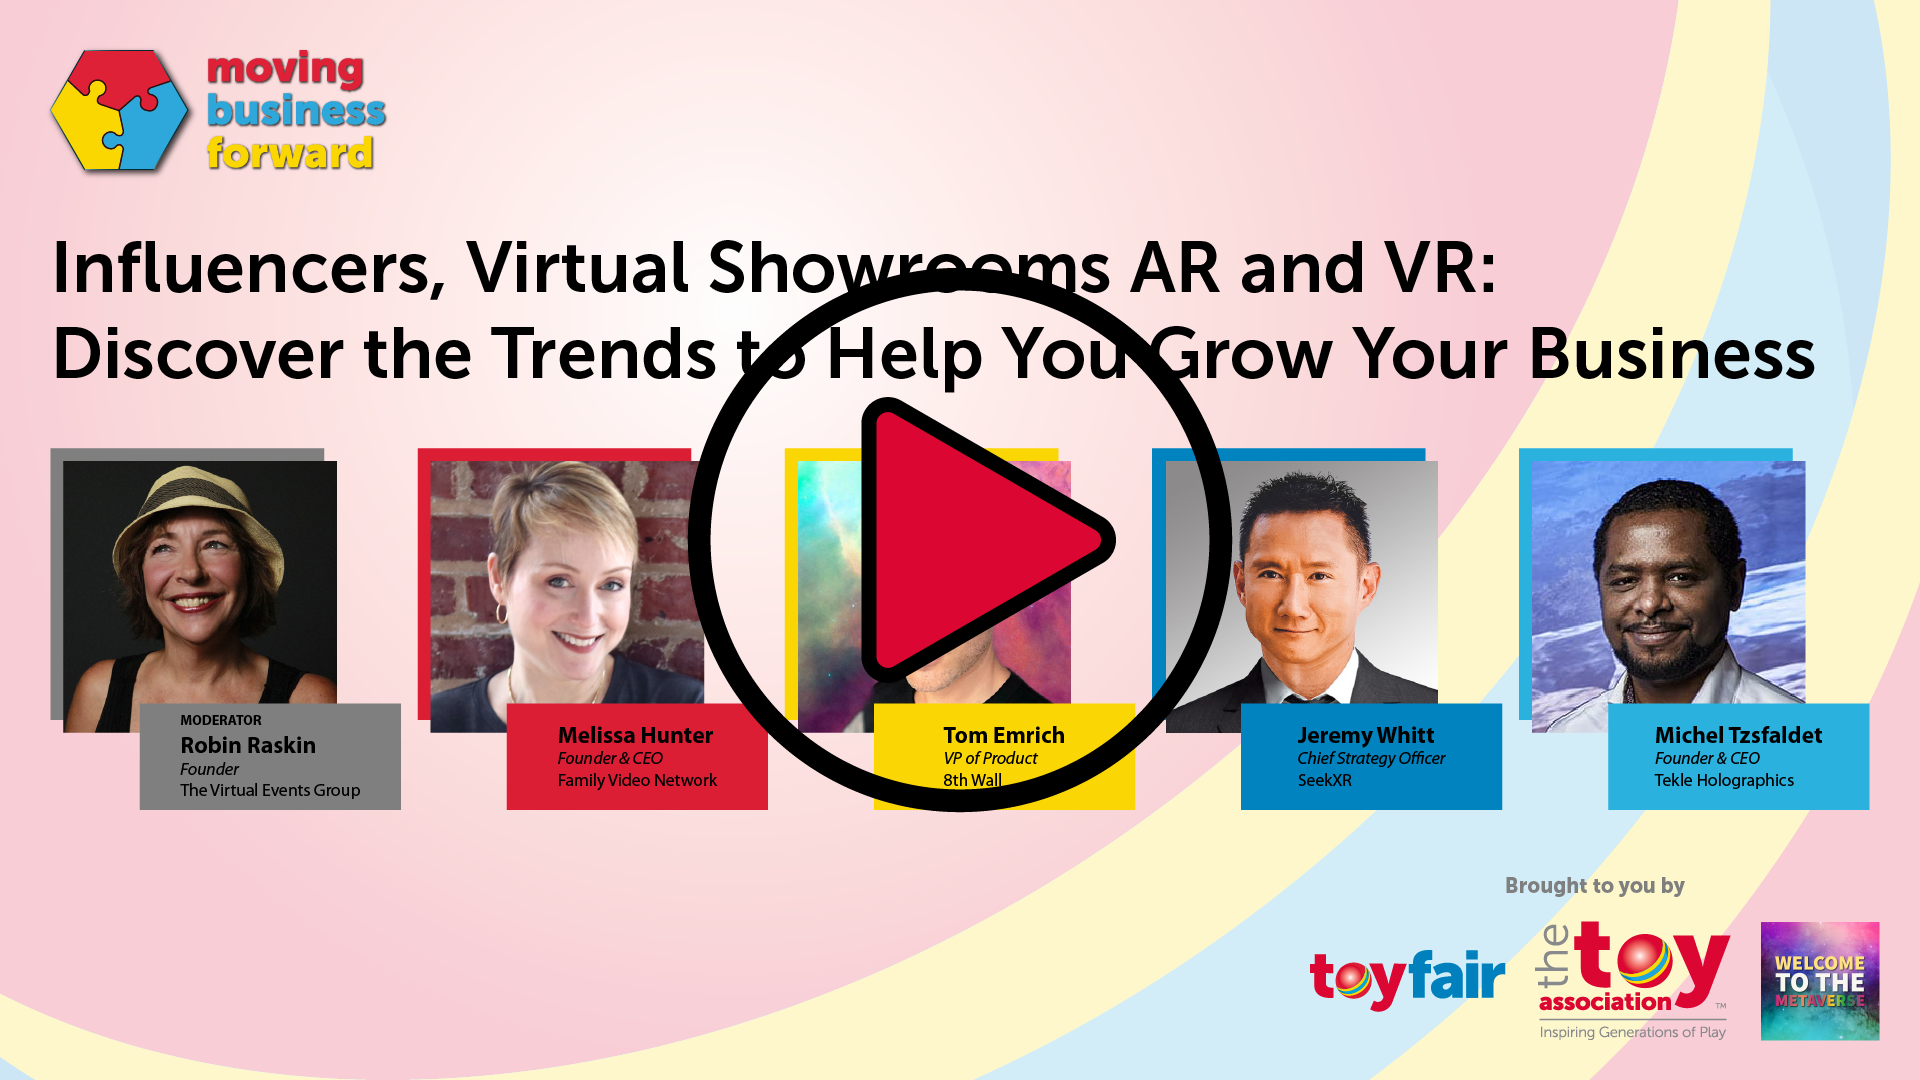 Influencers, Virtual Showrooms AR and VR: Discover the Trends to Help You Grow Your Business